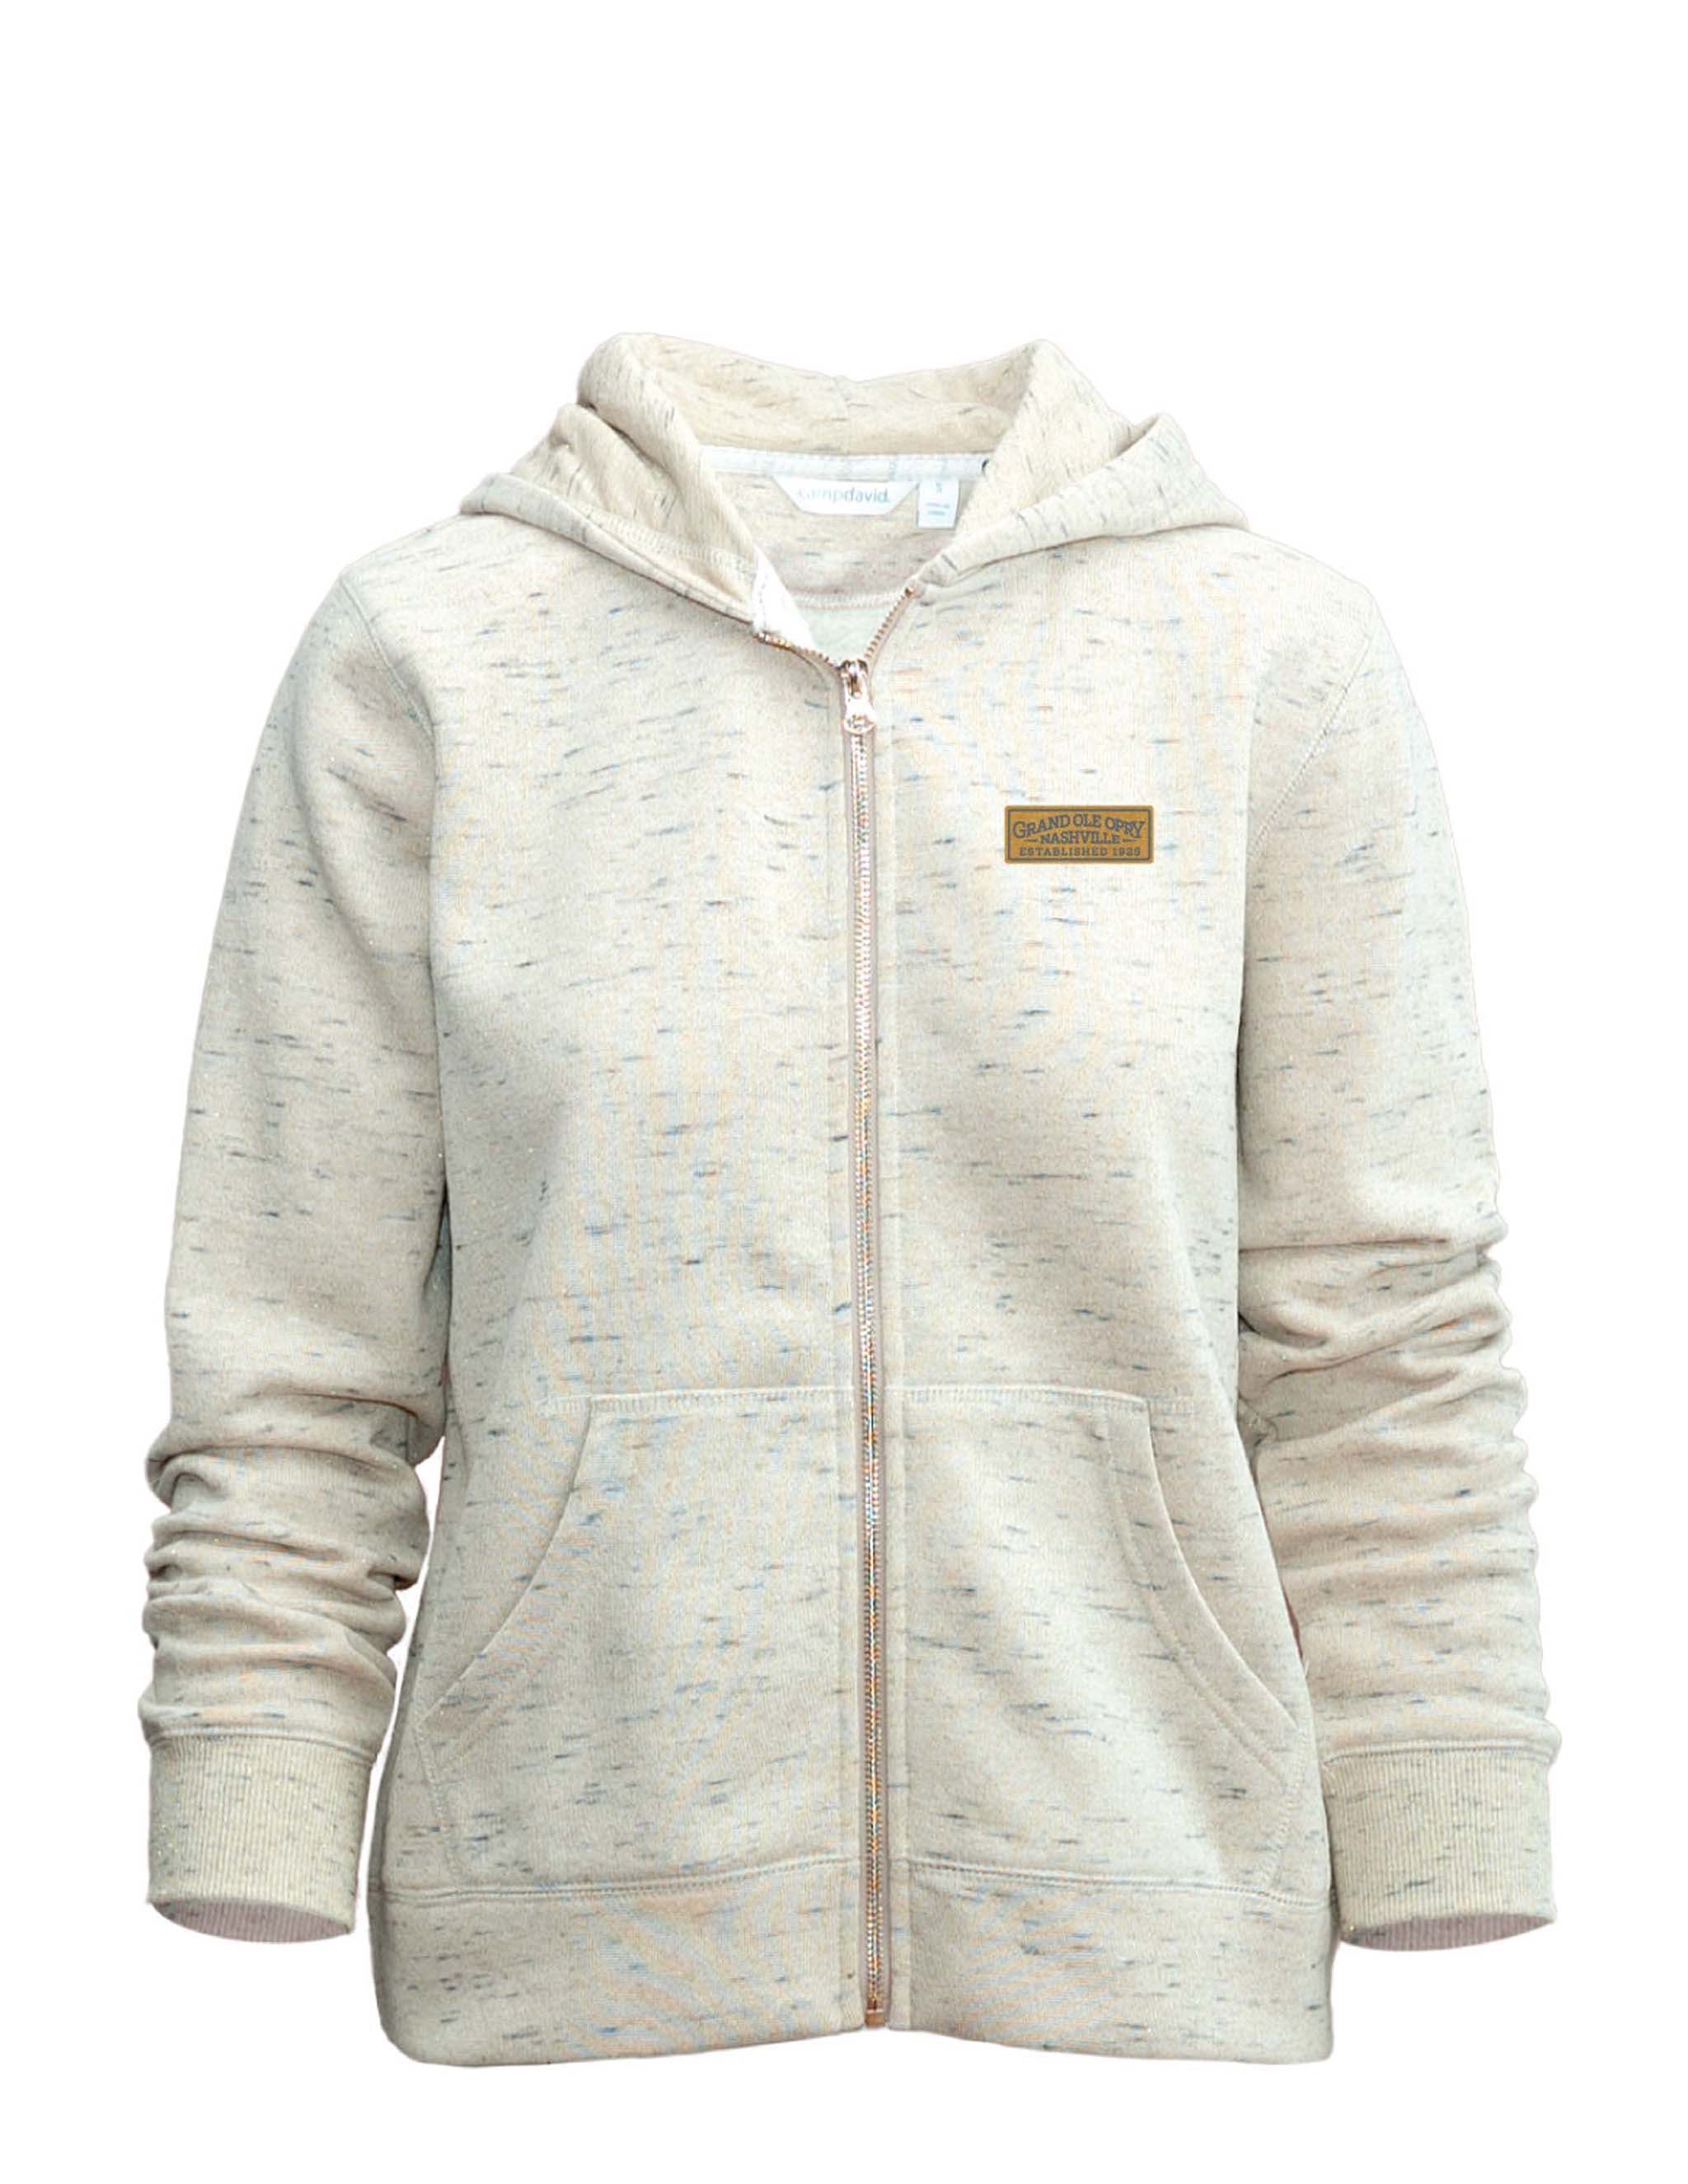 Opry Shimmer Zip Up Hooded Jacket